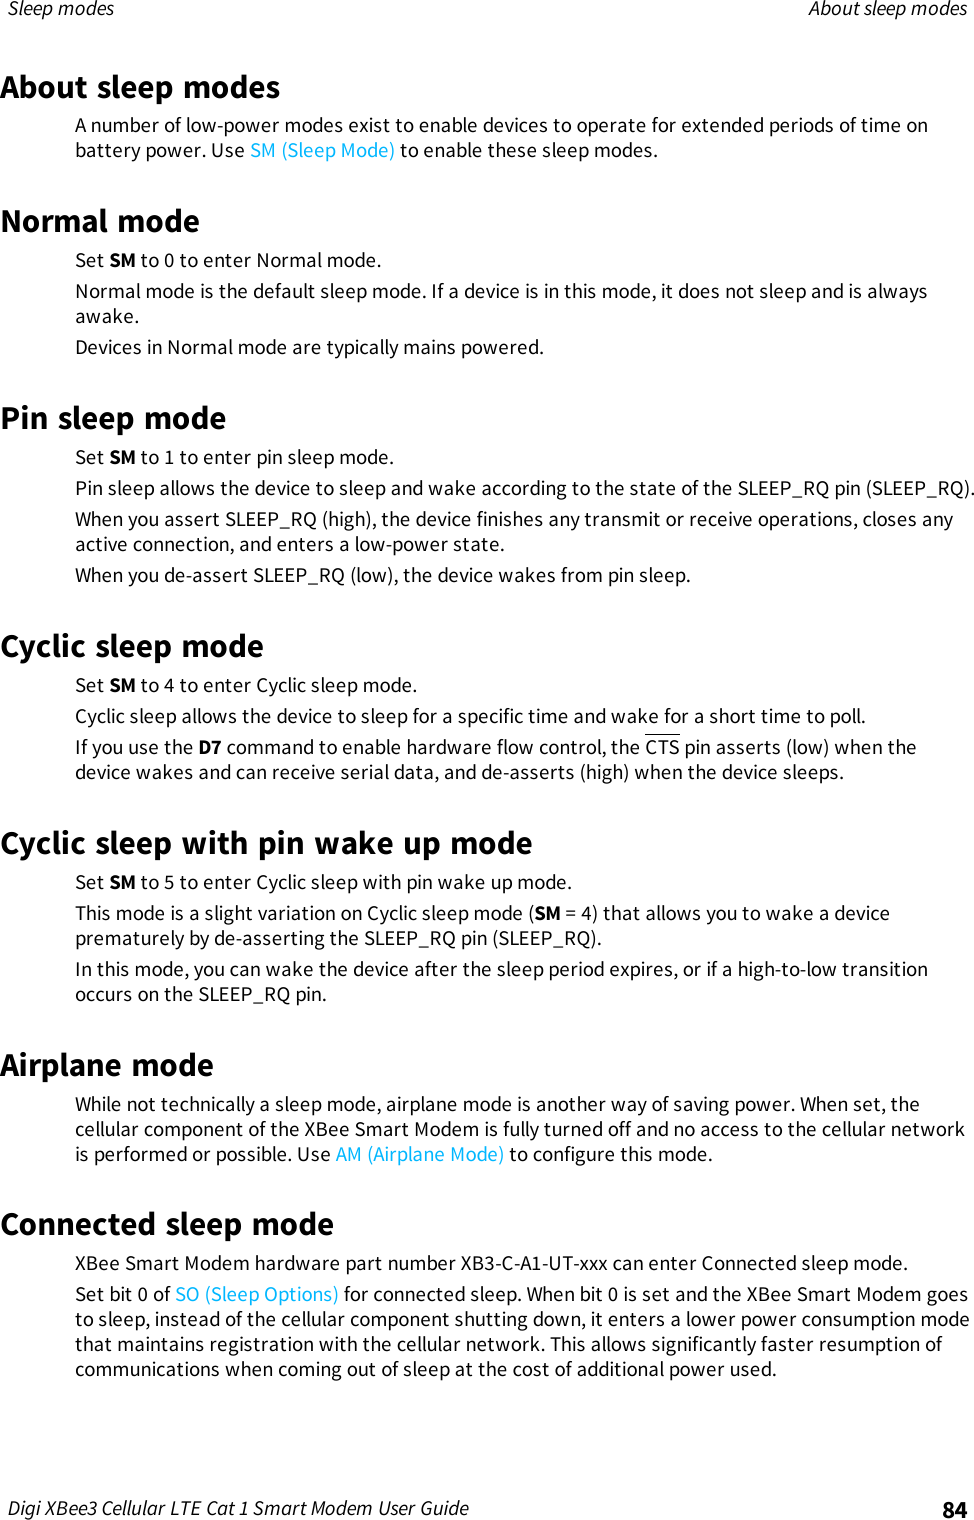 Sleep modes About sleep modesDigi XBee3 Cellular LTE Cat 1 Smart Modem User Guide 84About sleep modesA number of low-power modes exist to enable devices to operate for extended periods of time onbattery power. Use SM (Sleep Mode) to enable these sleep modes.Normal modeSet SM to 0 to enter Normal mode.Normal mode is the default sleep mode. If a device is in this mode, it does not sleep and is alwaysawake.Devices in Normal mode are typically mains powered.Pin sleep modeSet SM to 1 to enter pin sleep mode.Pin sleep allows the device to sleep and wake according to the state of the SLEEP_RQ pin (SLEEP_RQ).When you assert SLEEP_RQ (high), the device finishes any transmit or receive operations, closes anyactive connection, and enters a low-power state.When you de-assert SLEEP_RQ (low), the device wakes from pin sleep.Cyclic sleep modeSet SM to 4 to enter Cyclic sleep mode.Cyclic sleep allows the device to sleep for a specific time and wake for a short time to poll.If you use the D7 command to enable hardware flow control, the CTS pin asserts (low) when thedevice wakes and can receive serial data, and de-asserts (high) when the device sleeps.Cyclic sleep with pin wake up modeSet SM to 5 to enter Cyclic sleep with pin wake up mode.This mode is a slight variation on Cyclic sleep mode (SM = 4) that allows you to wake a deviceprematurely by de-asserting the SLEEP_RQ pin (SLEEP_RQ).In this mode, you can wake the device after the sleep period expires, or if a high-to-low transitionoccurs on the SLEEP_RQ pin.Airplane modeWhile not technically a sleep mode, airplane mode is another way of saving power. When set, thecellular component of the XBee Smart Modem is fully turned off and no access to the cellular networkis performed or possible. Use AM (Airplane Mode) to configure this mode.Connected sleep modeXBee Smart Modem hardware part number XB3-C-A1-UT-xxx can enter Connected sleep mode.Set bit 0 of SO (Sleep Options) for connected sleep. When bit 0 is set and the XBee Smart Modem goesto sleep, instead of the cellular component shutting down, it enters a lower power consumption modethat maintains registration with the cellular network. This allows significantly faster resumption ofcommunications when coming out of sleep at the cost of additional power used.